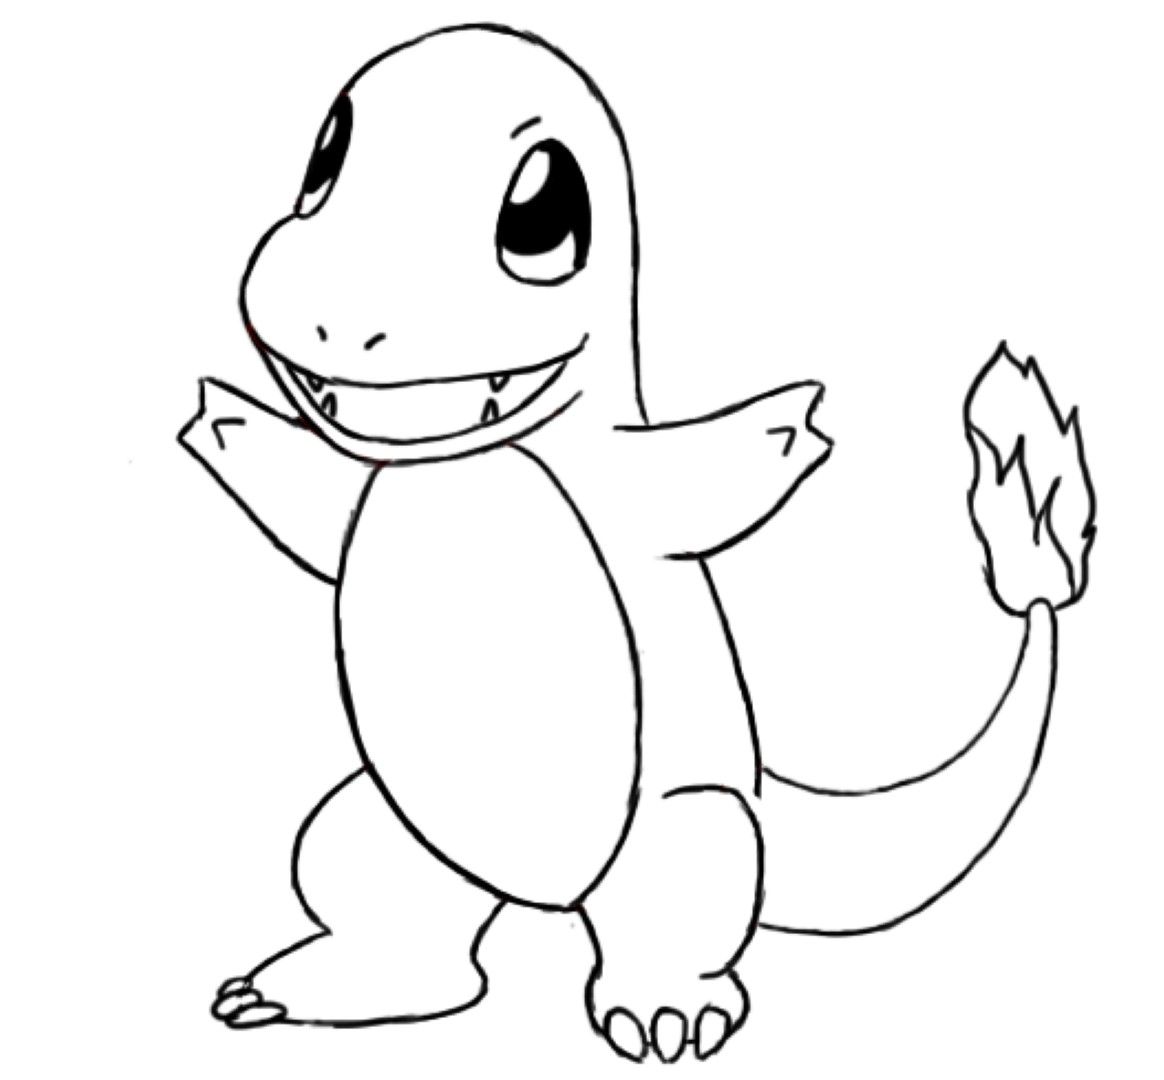 Pokemon Charmander Coloring Pages   Coloring Home